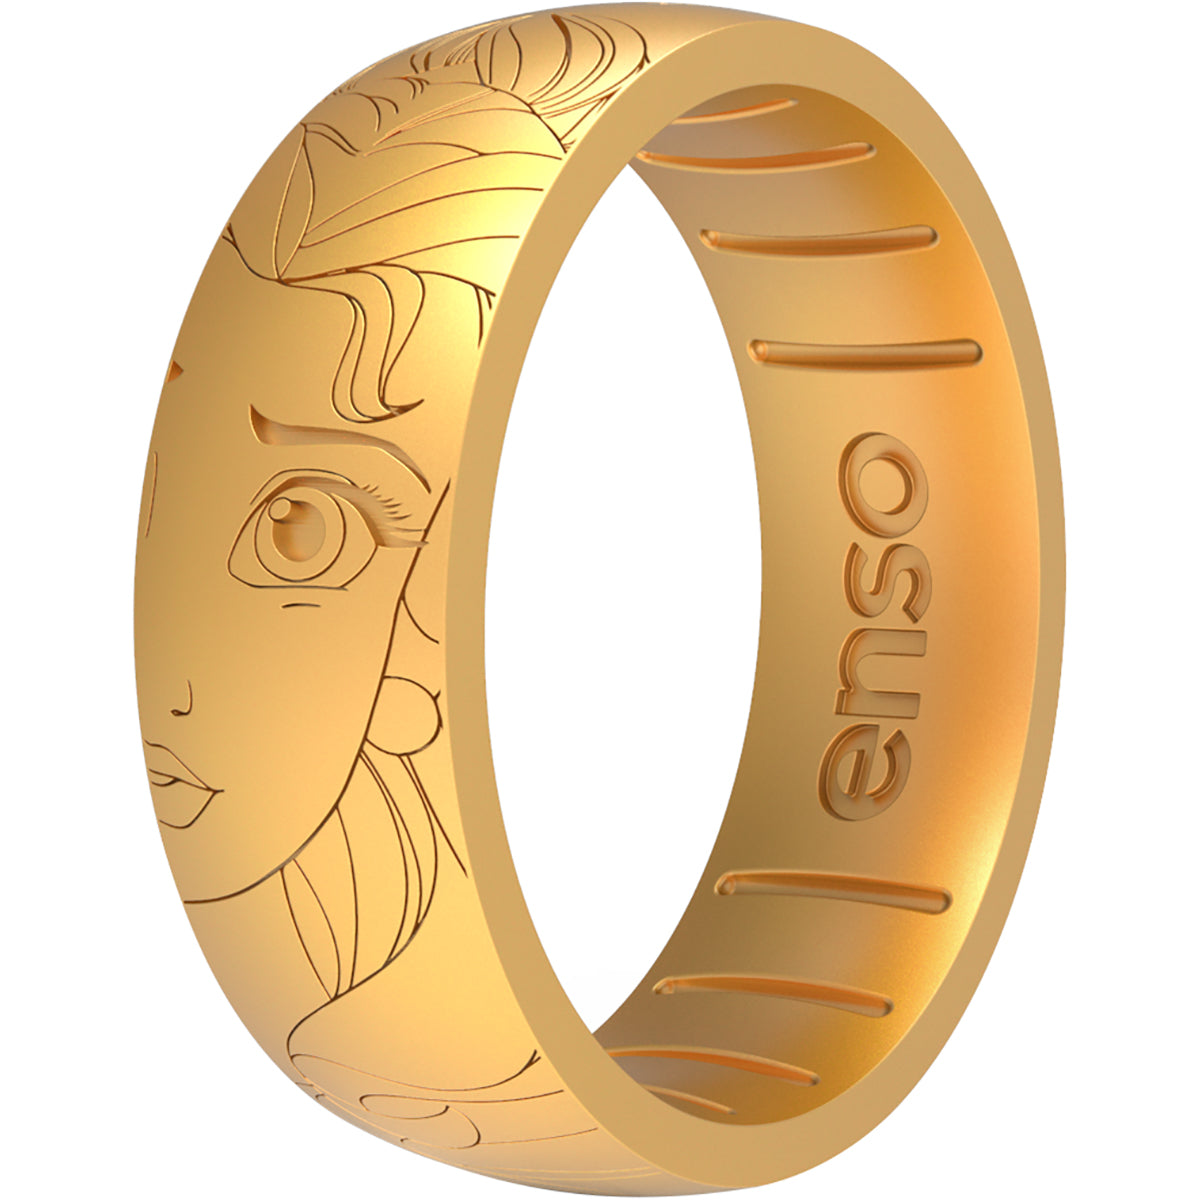 Enso Rings Disney Collection Belle Classic Silicone Ring- Metallic Golden Yellow Enso Rings